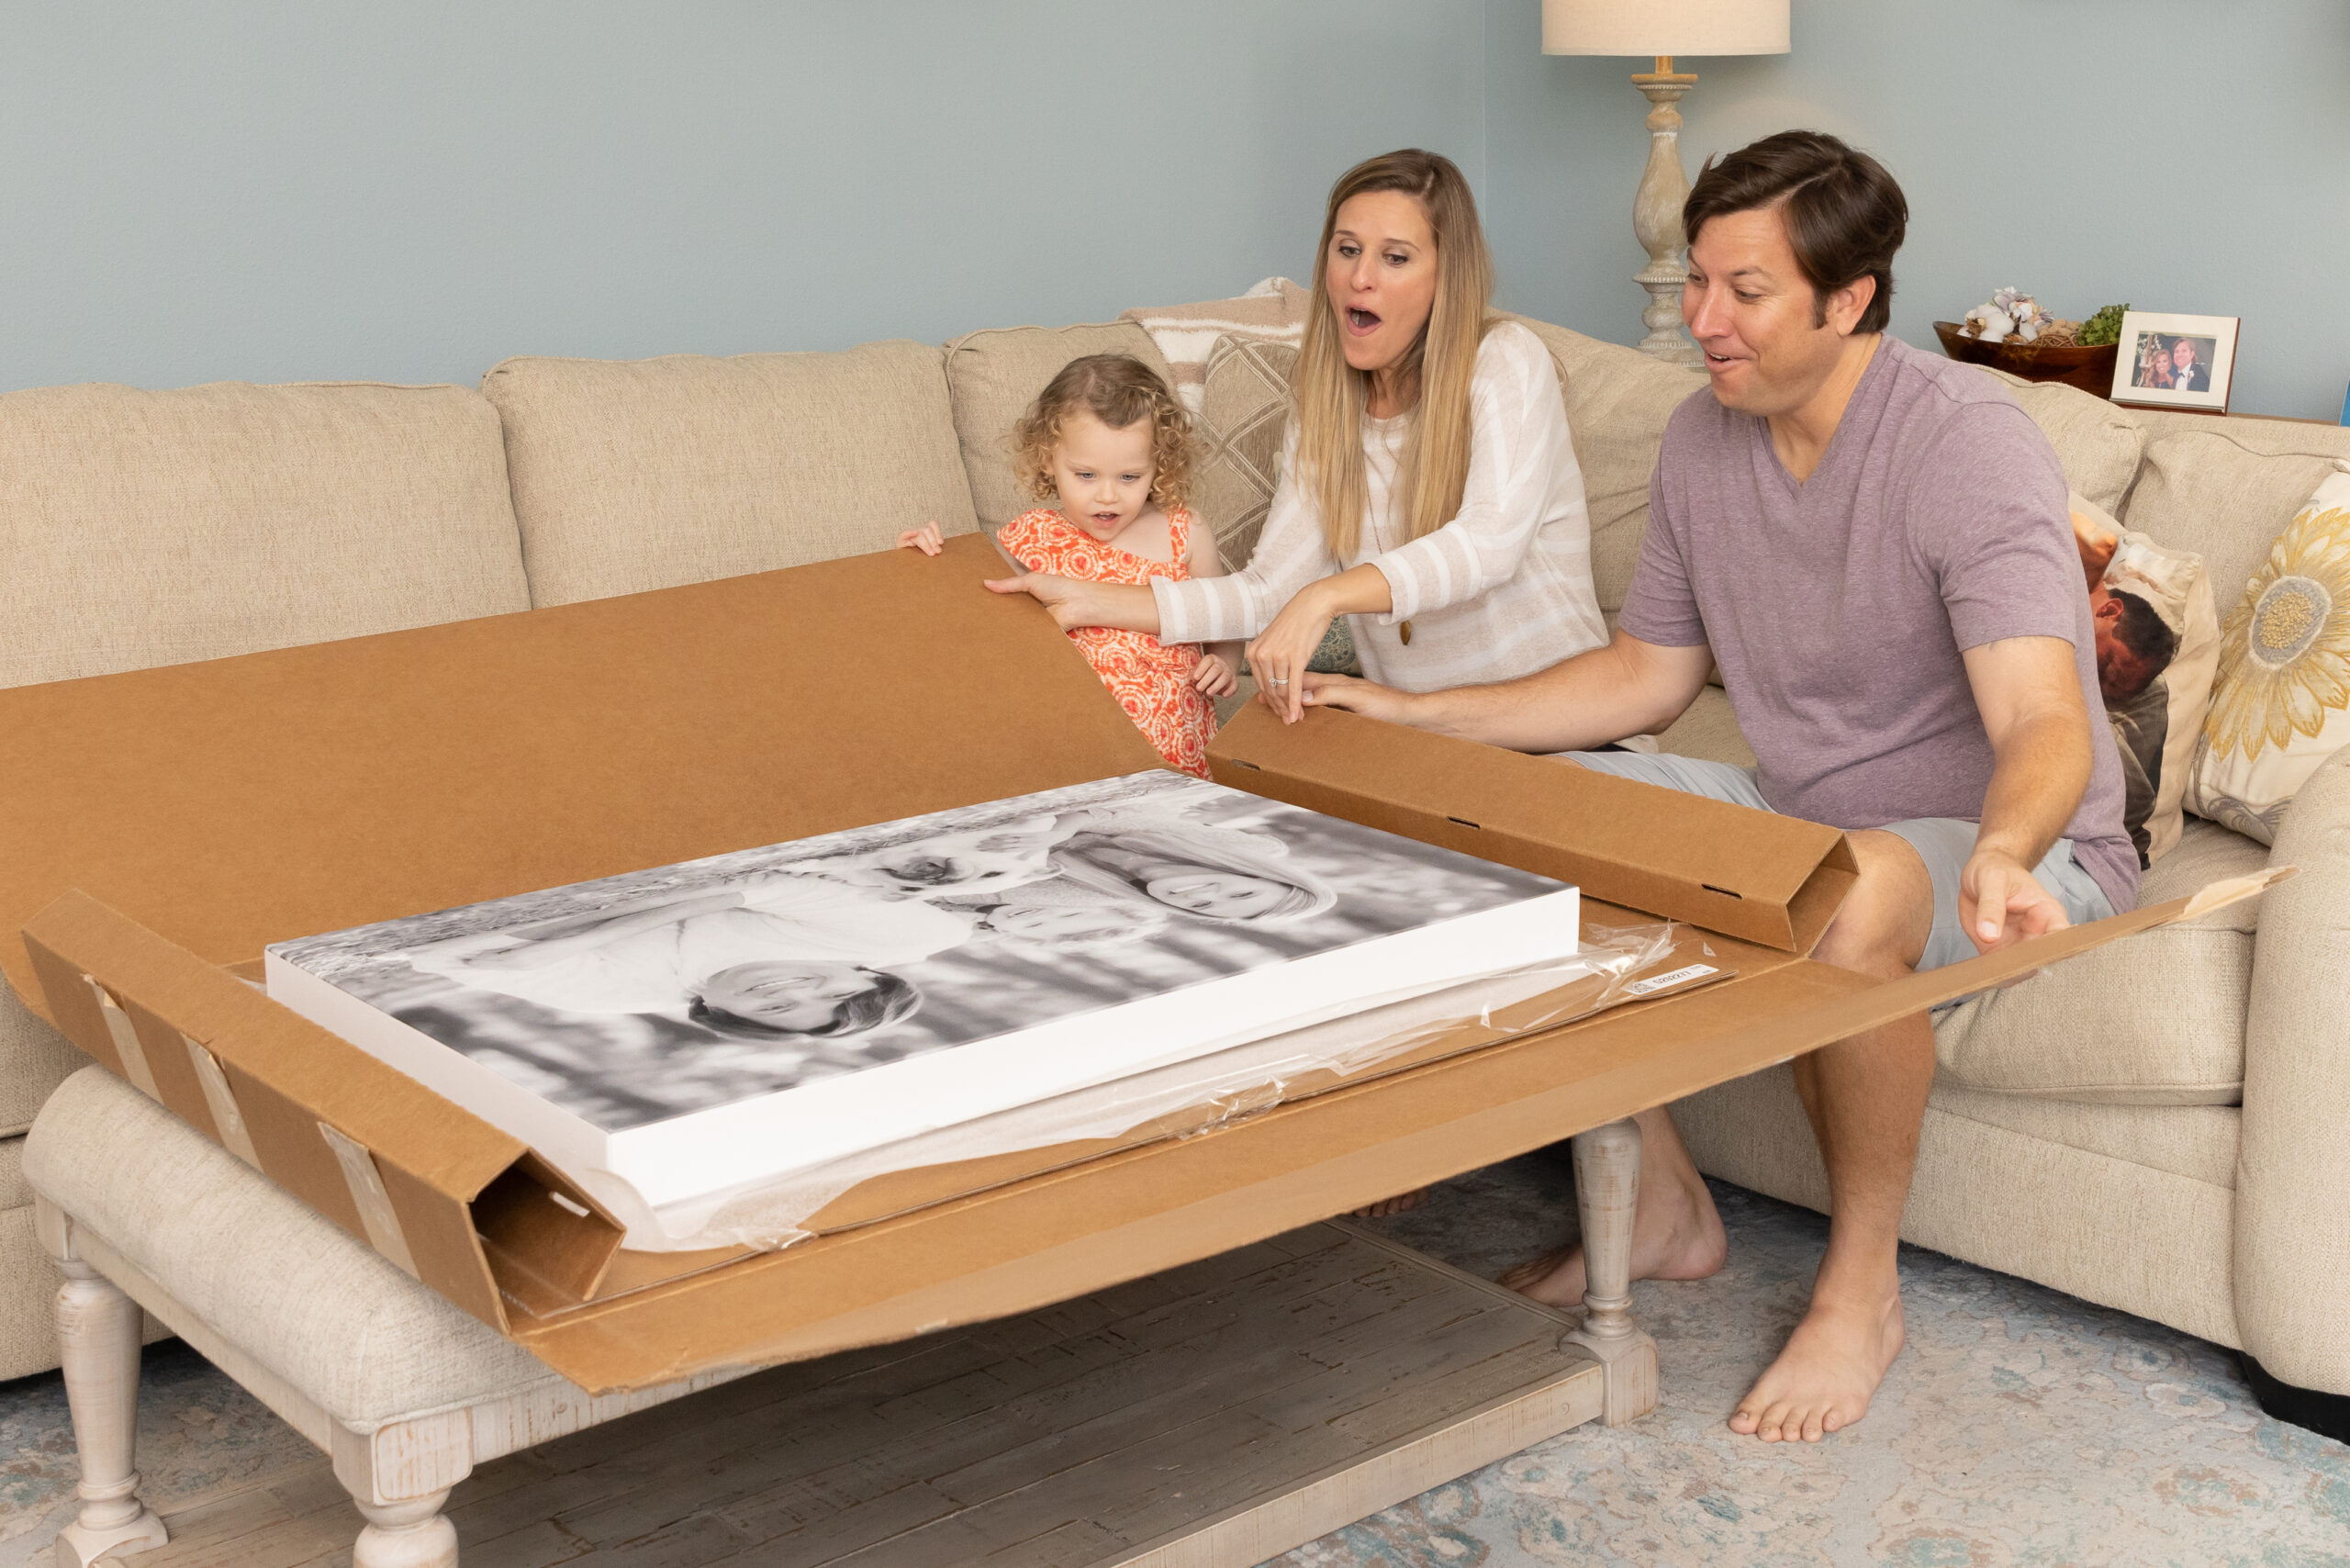 family of 3 opening their photo prints done professionally by their photographer